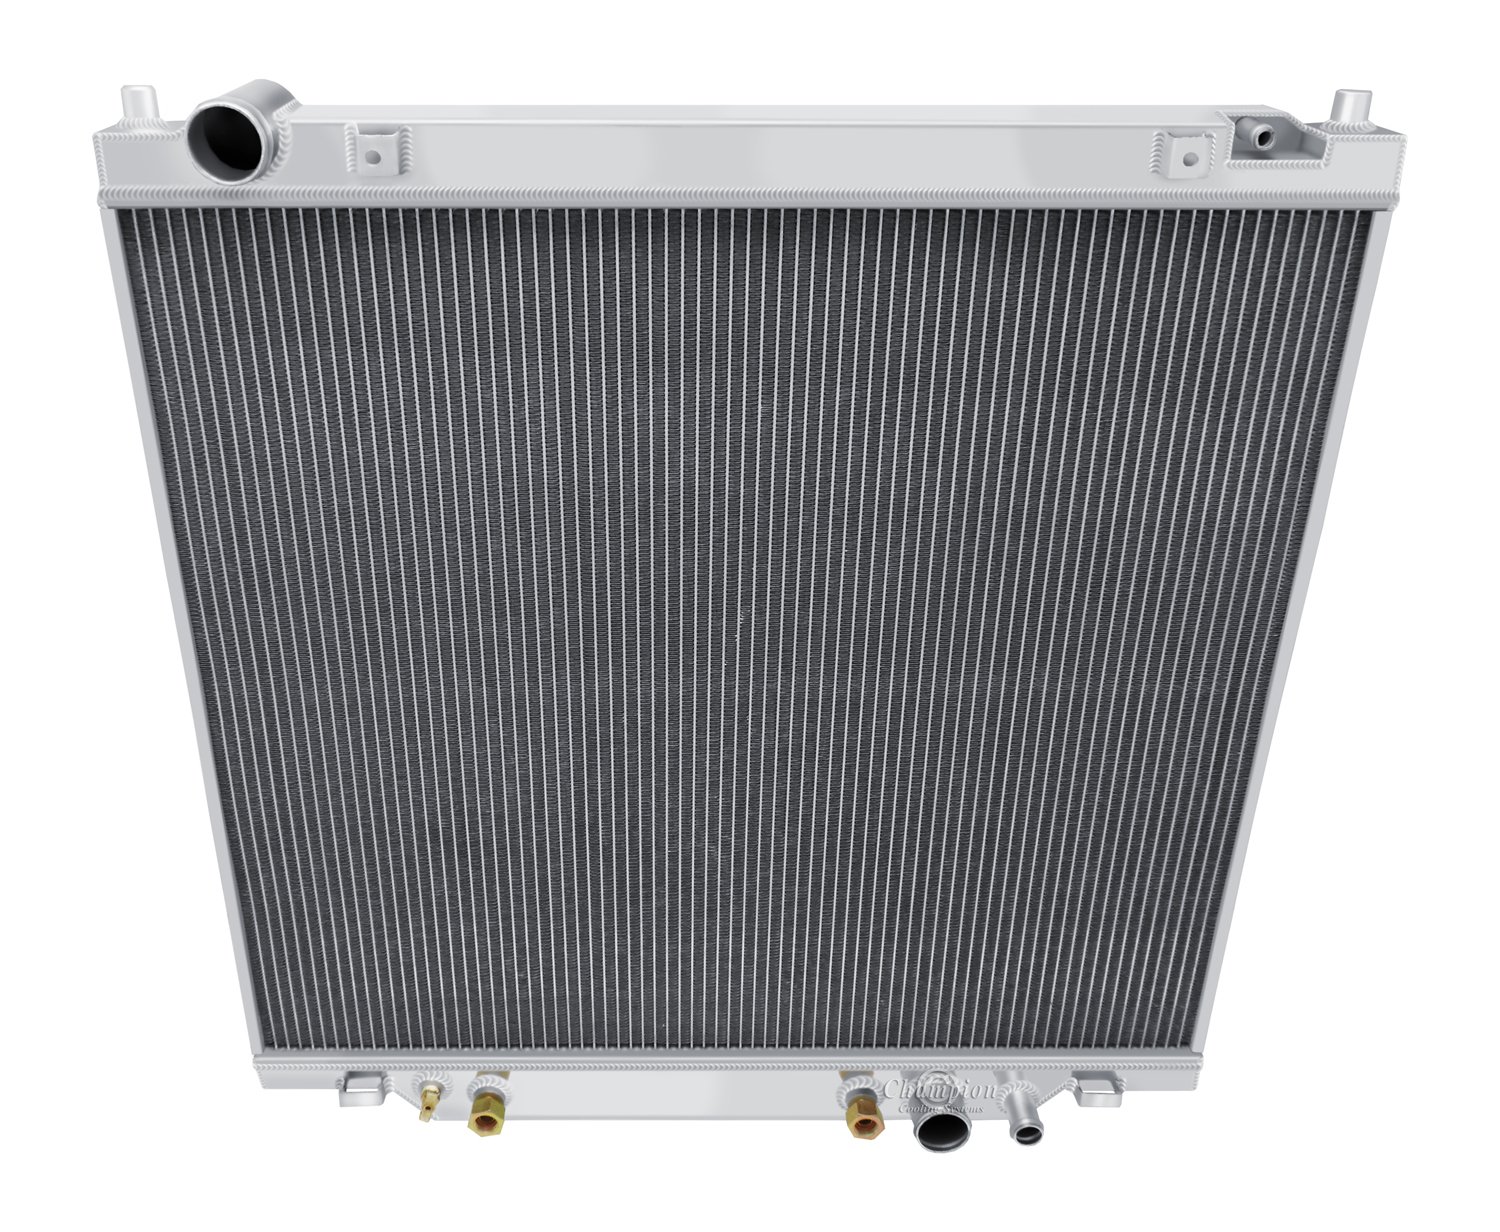 All-Aluminum Replacement Radiator for 1999-2004 Ford Truck/SUV